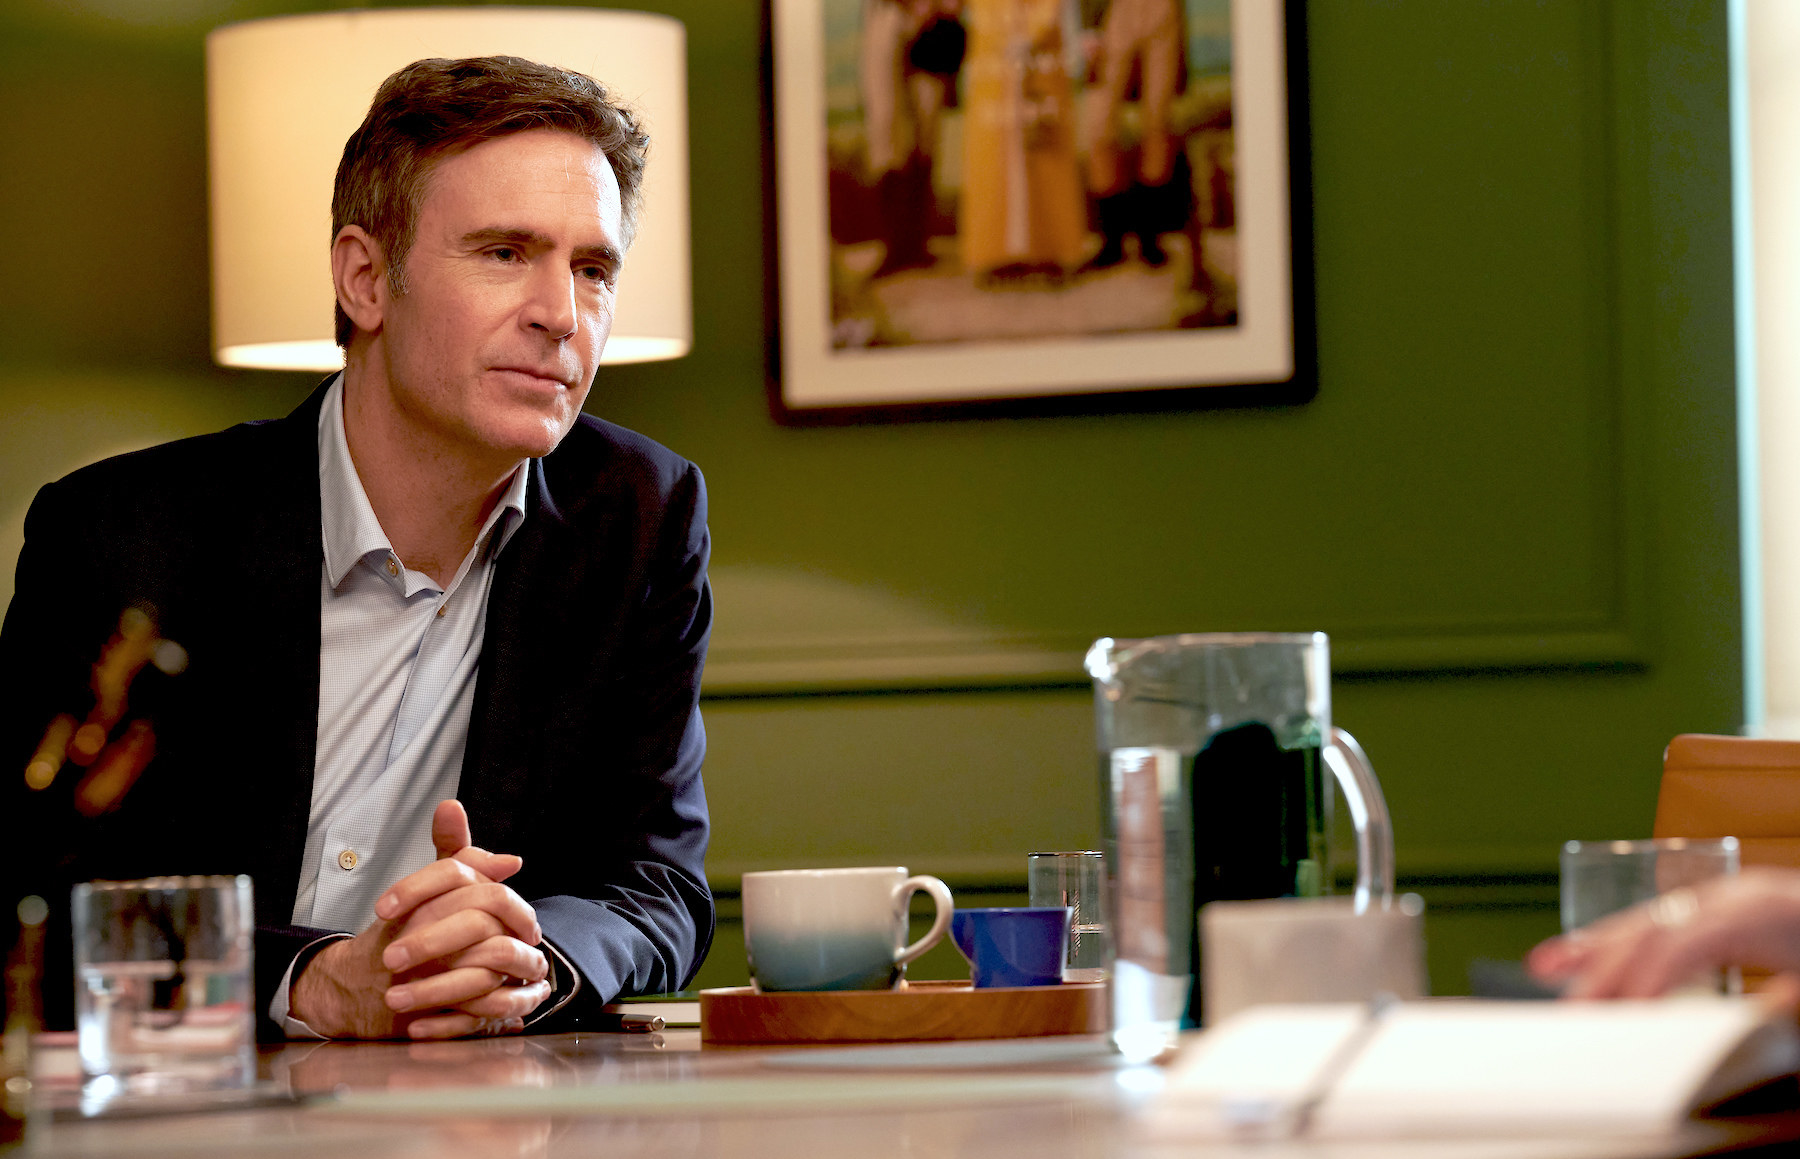 Jack Davenport as Jonathan Nightingale in Ten Percent sits at a desk in an office room and talks to someone off camera